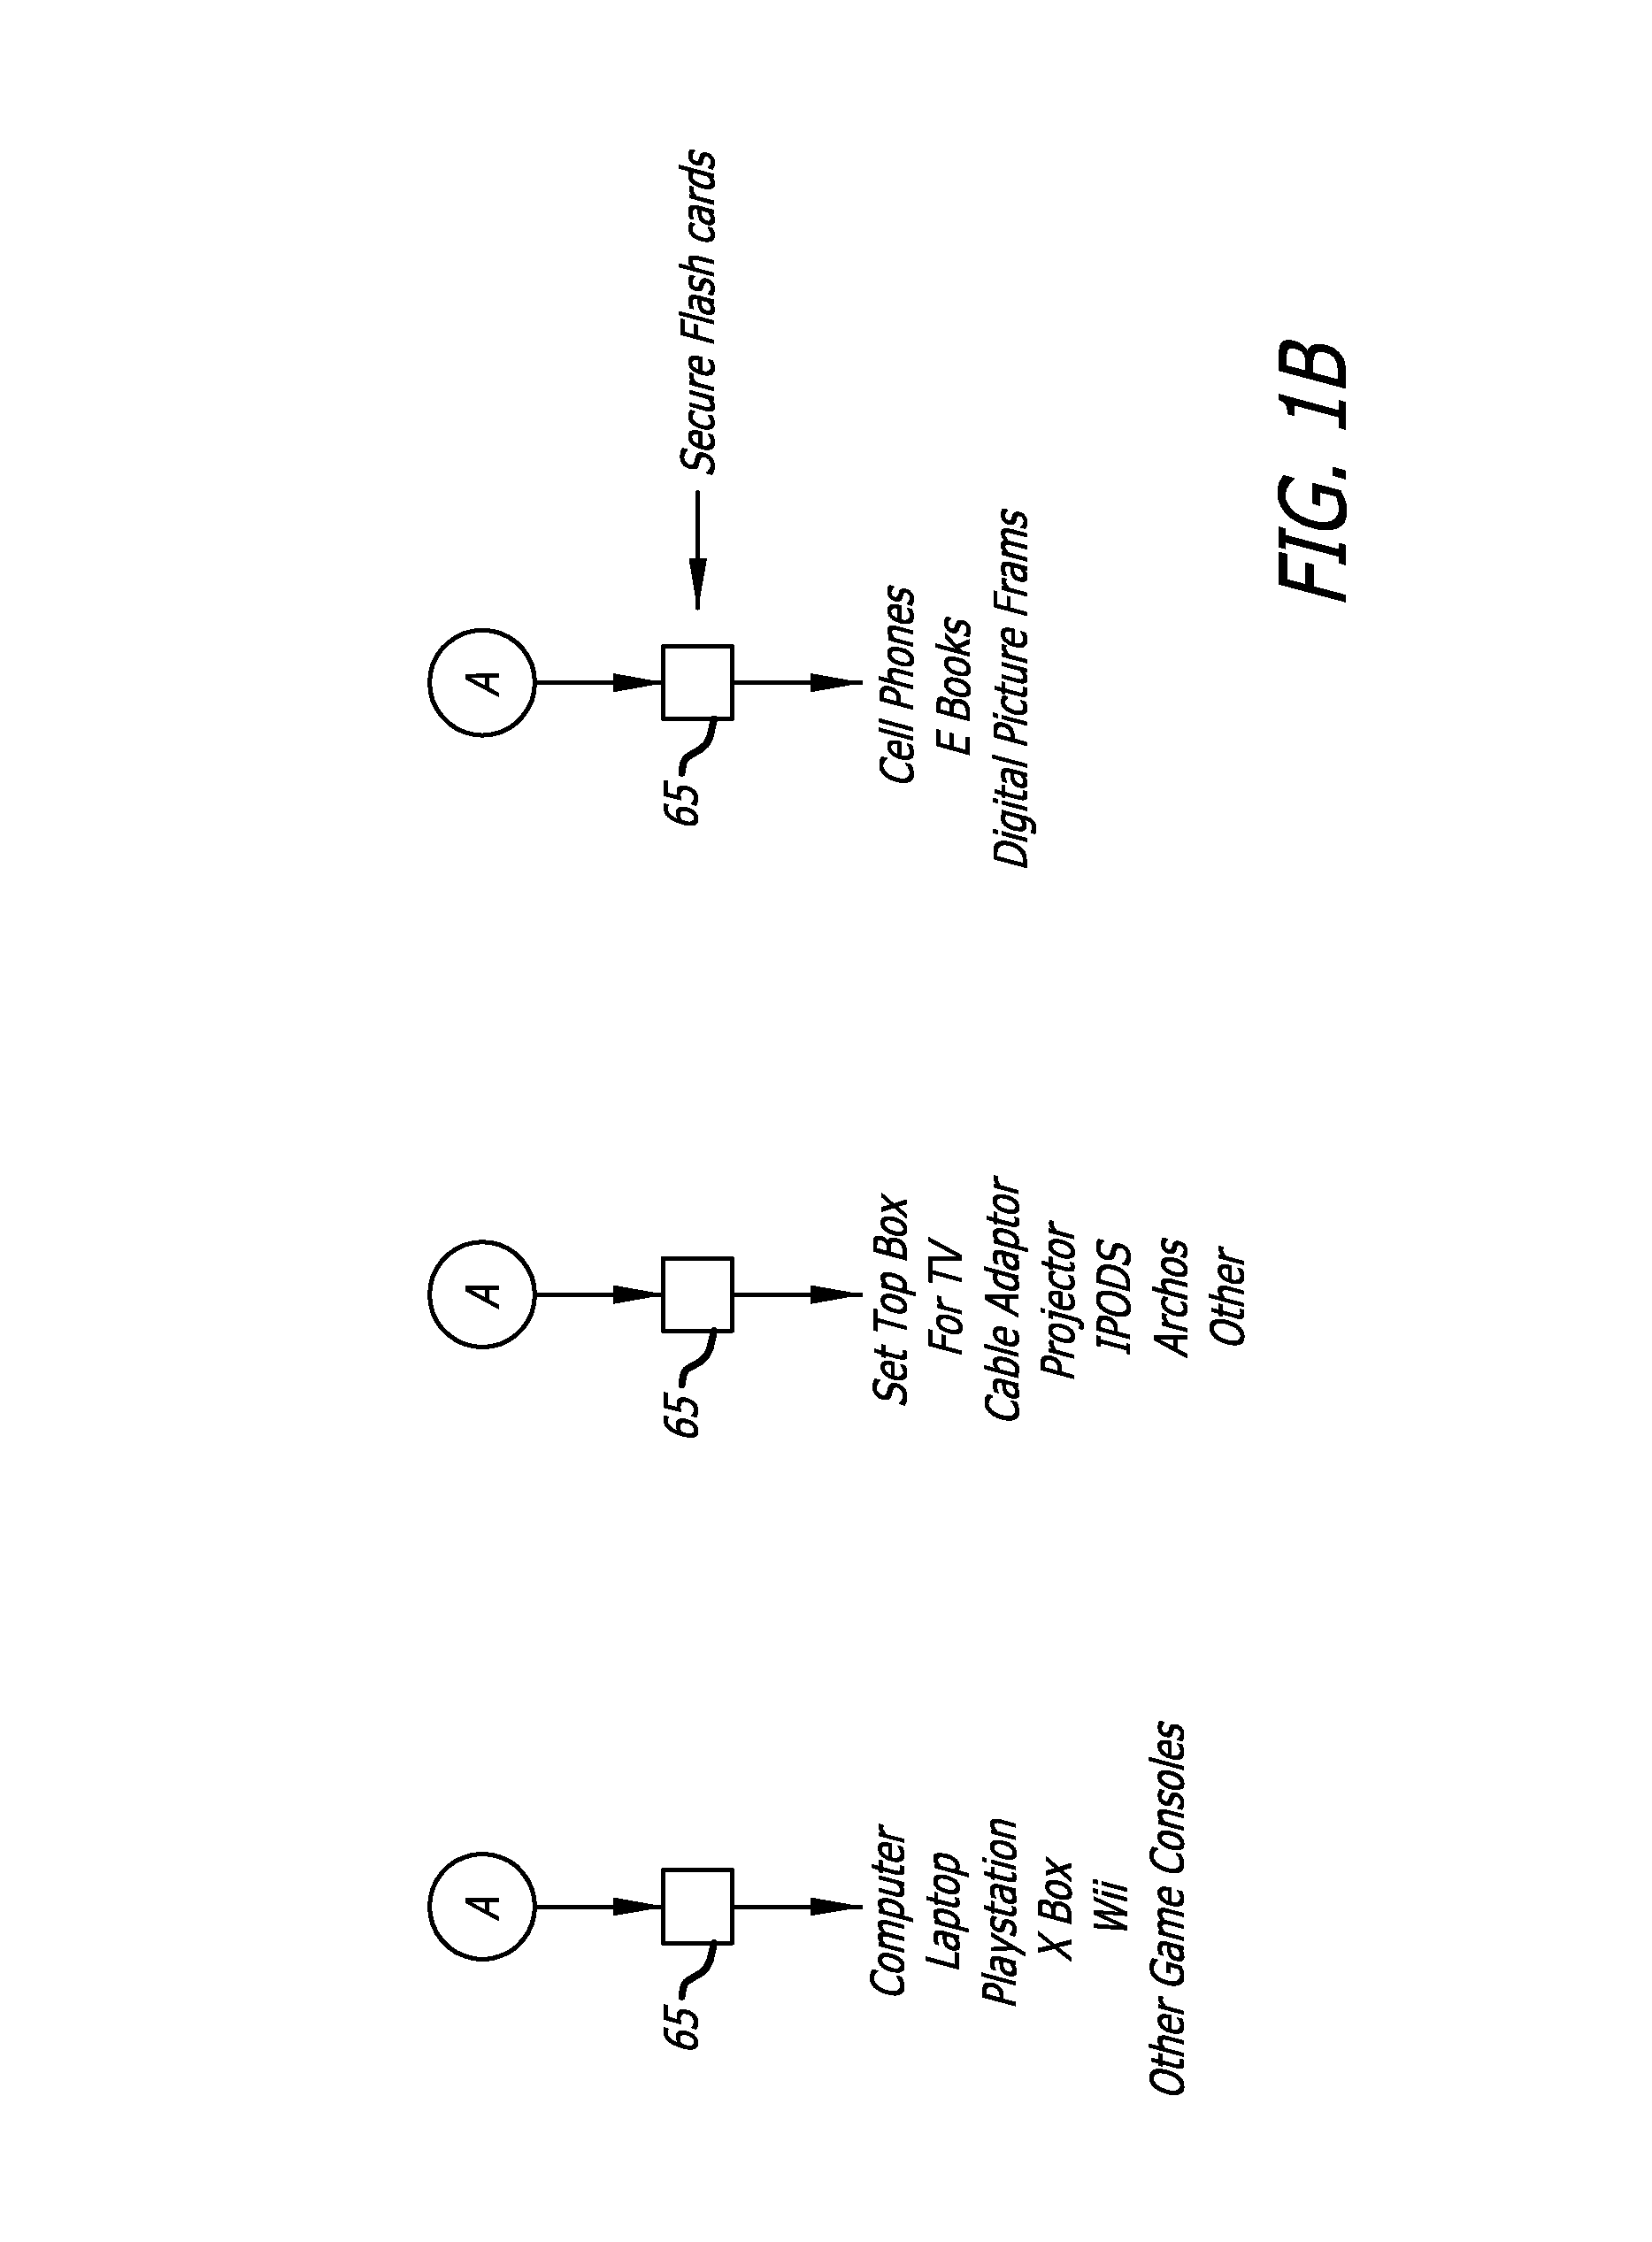 System and method for wireless content delivery and transaction management